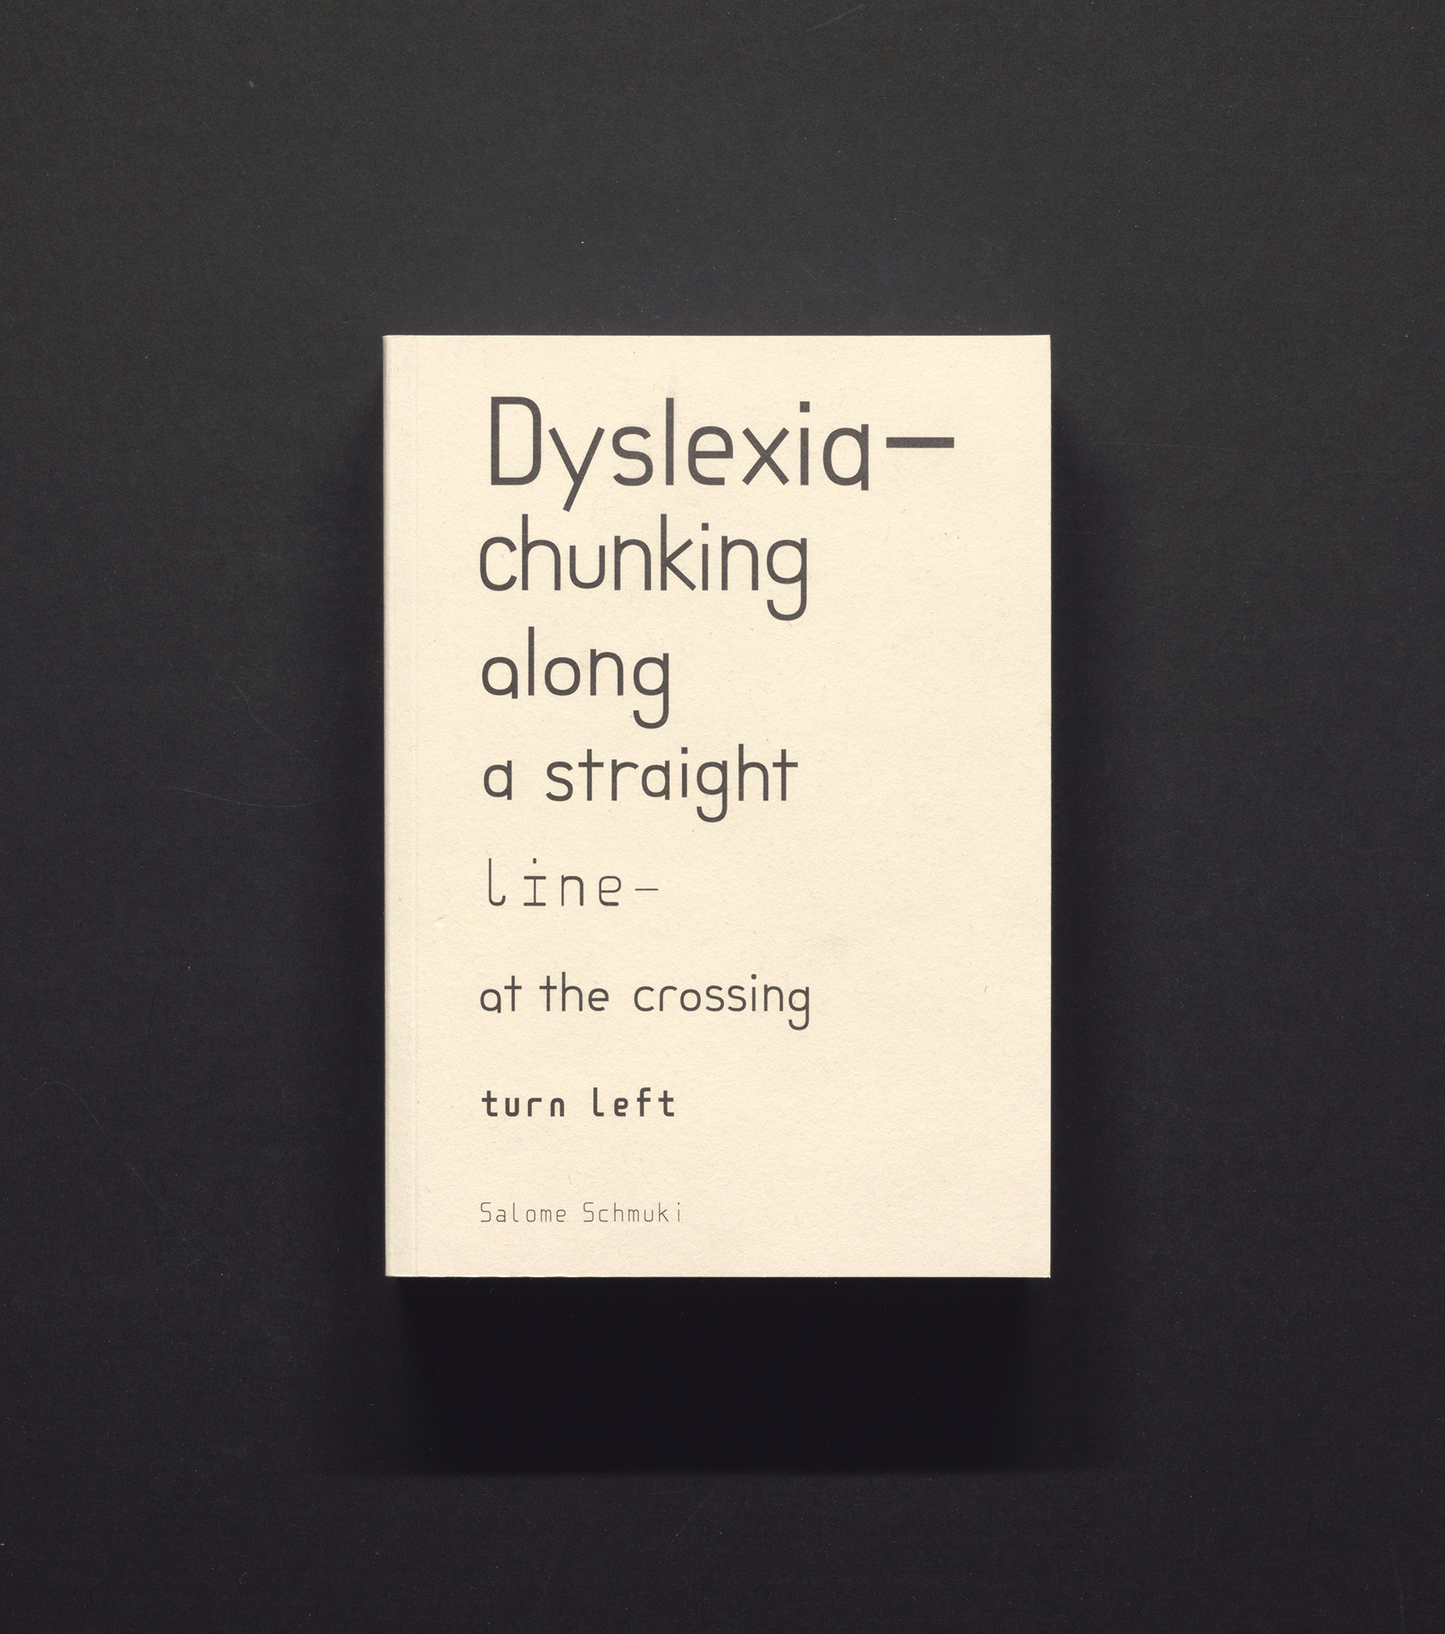 Dyslexia - chunking along a straight line – at the crossing turn left